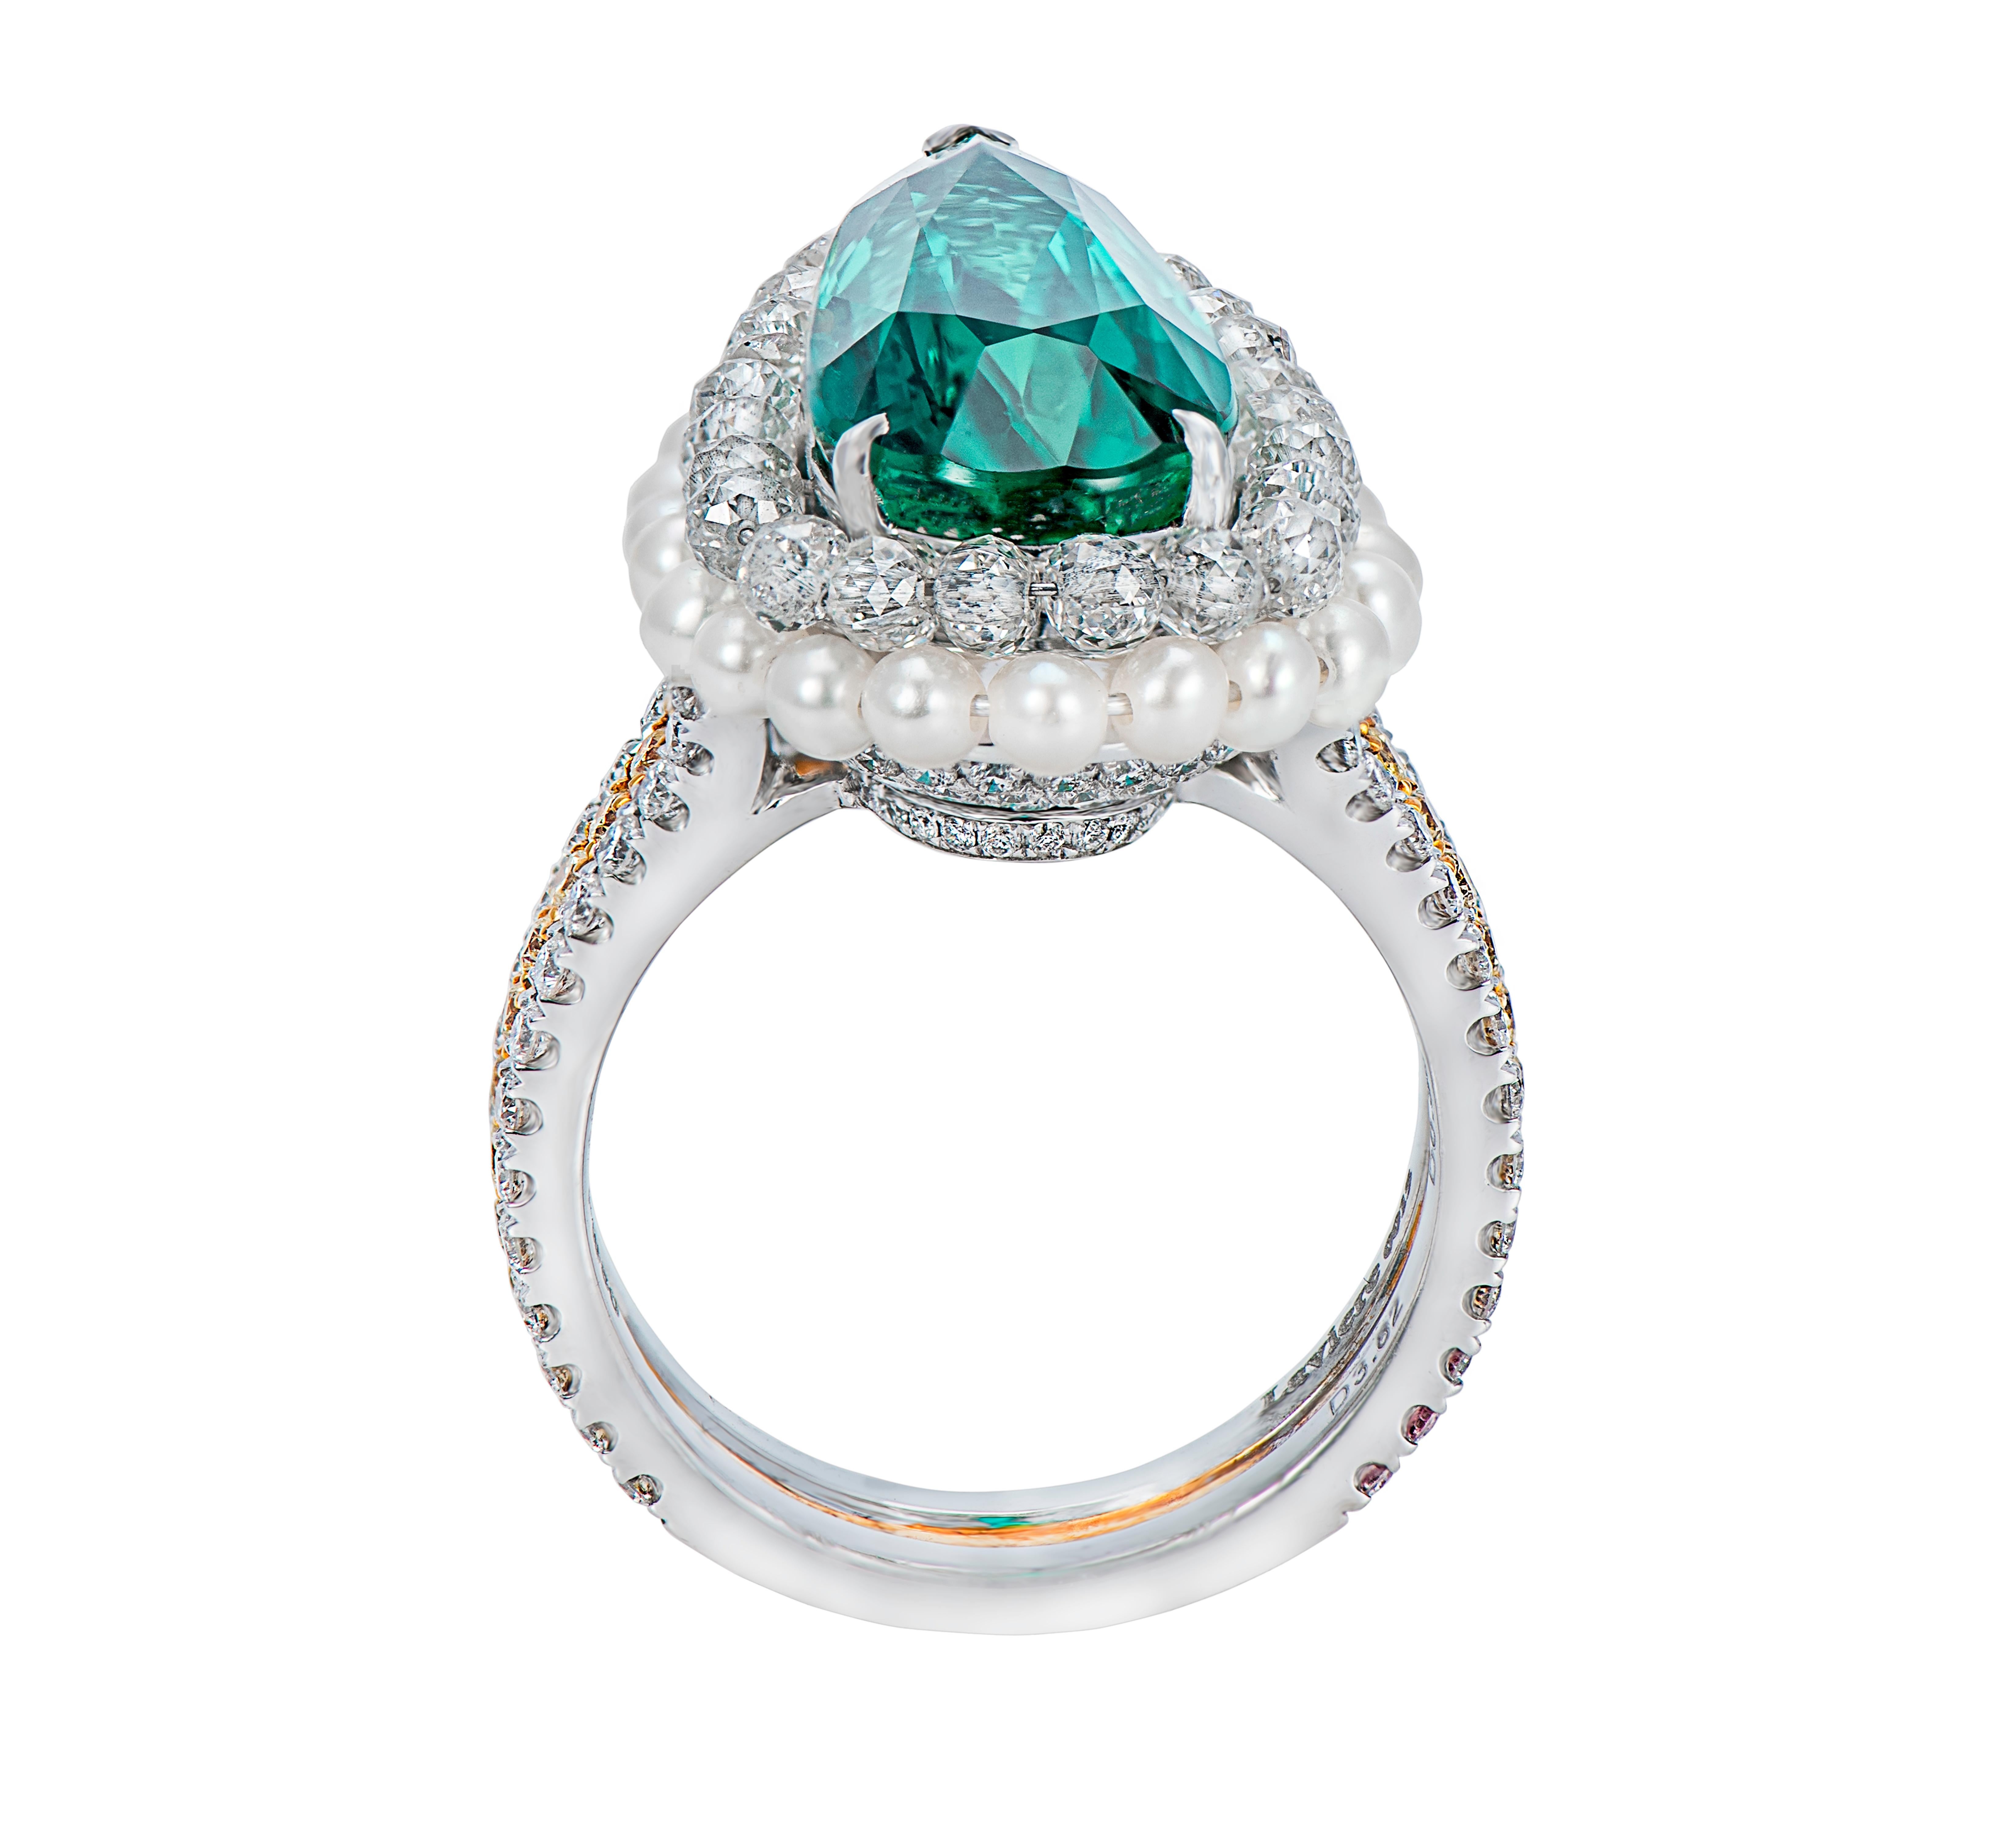 Platinum and 18 karat white & yellow gold Emerald and Diamond ring from the Imperial Green Collection of Laviere. The ring is set with a GRS certified 7.13 carat Emerald, surrounded by 26 freshwater pearls of a total 2.29 carats along with 4.18